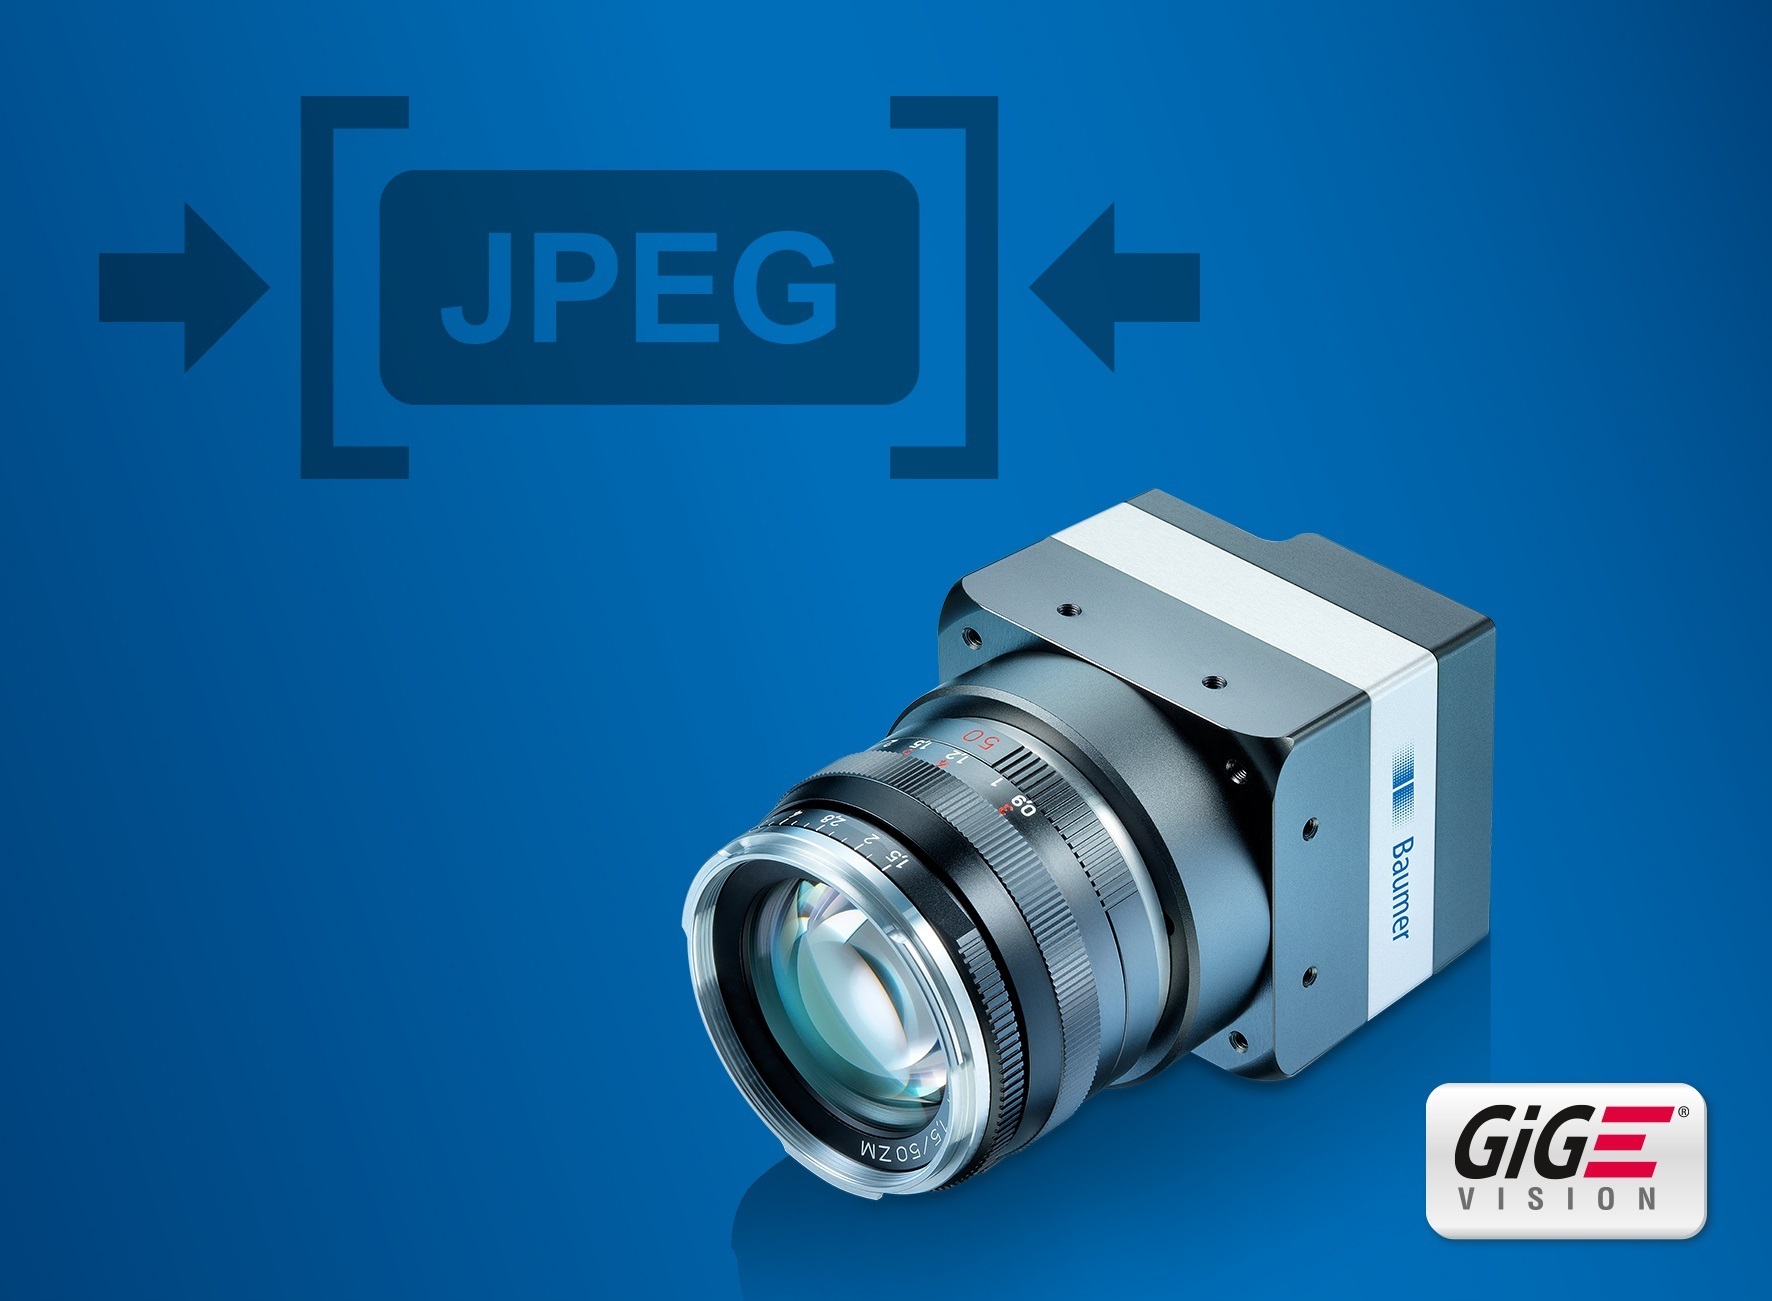 The new LX cameras with JPEG image compression save bandwidth, CPU load and storage space for a simplified, low-cost system design.